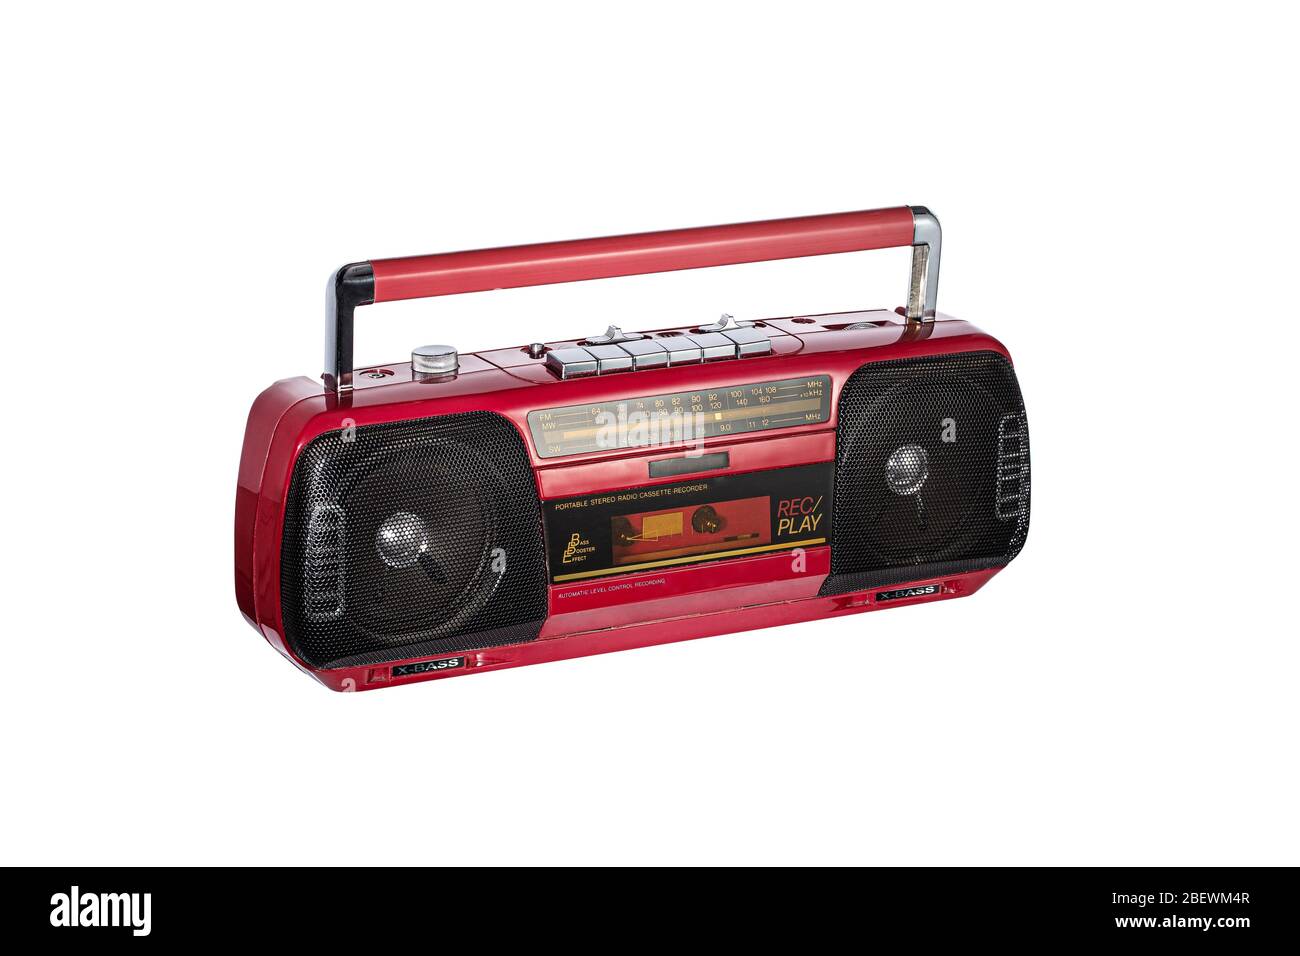 Vintage radio cassette recorder isolated over white background. Old retro  red radio and cassette player. retro technology Stock Photo - Alamy